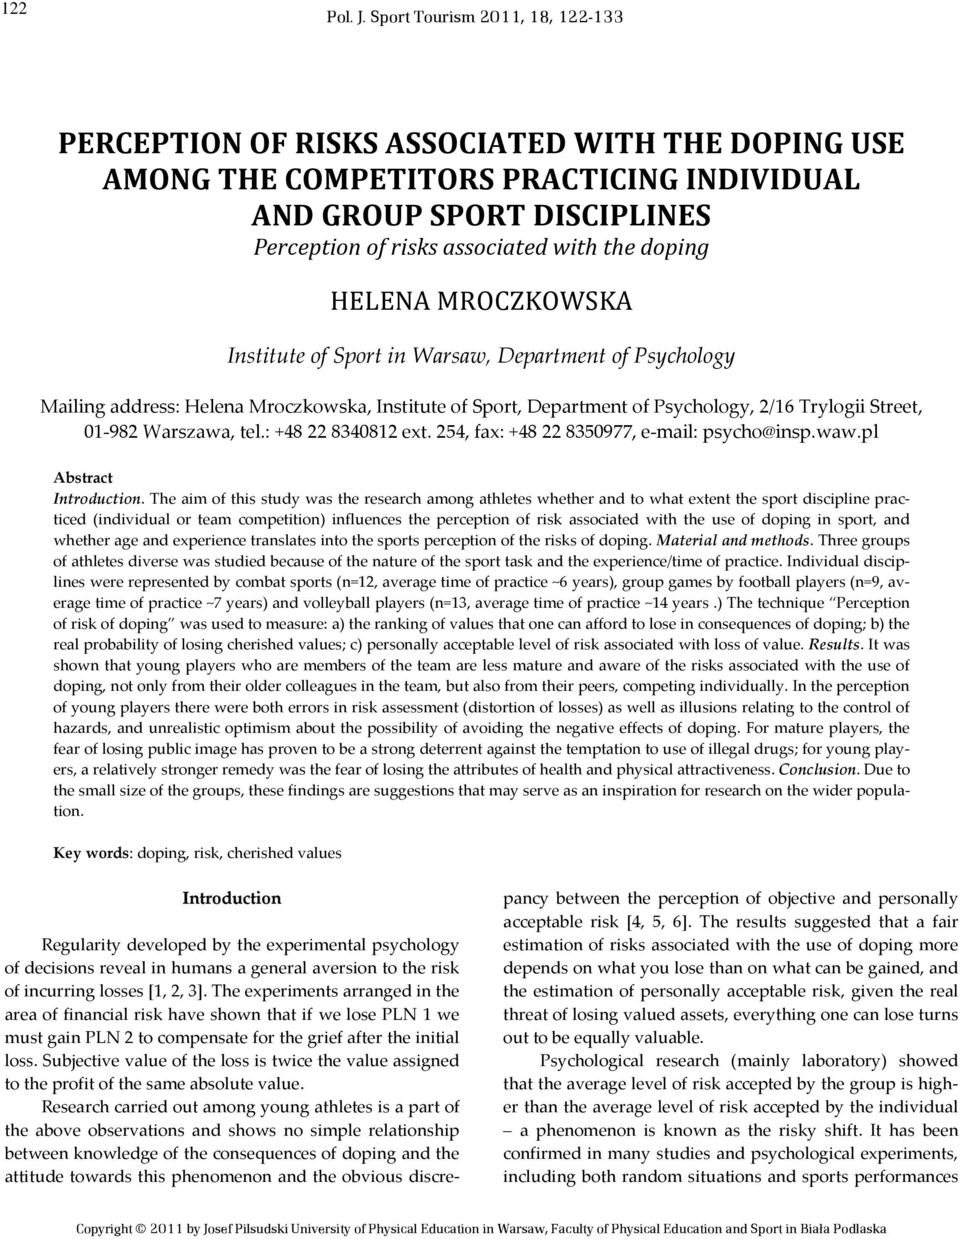 Sport Tourism 2011, 18, 122-133 PERCEPTION OF RISKS ASSOCIATED WITH THE DOPING USE AMONG THE COMPETITORS PRACTICING INDIVIDUAL AND GROUP SPORT DISCIPLINES Perception of risks associated with the